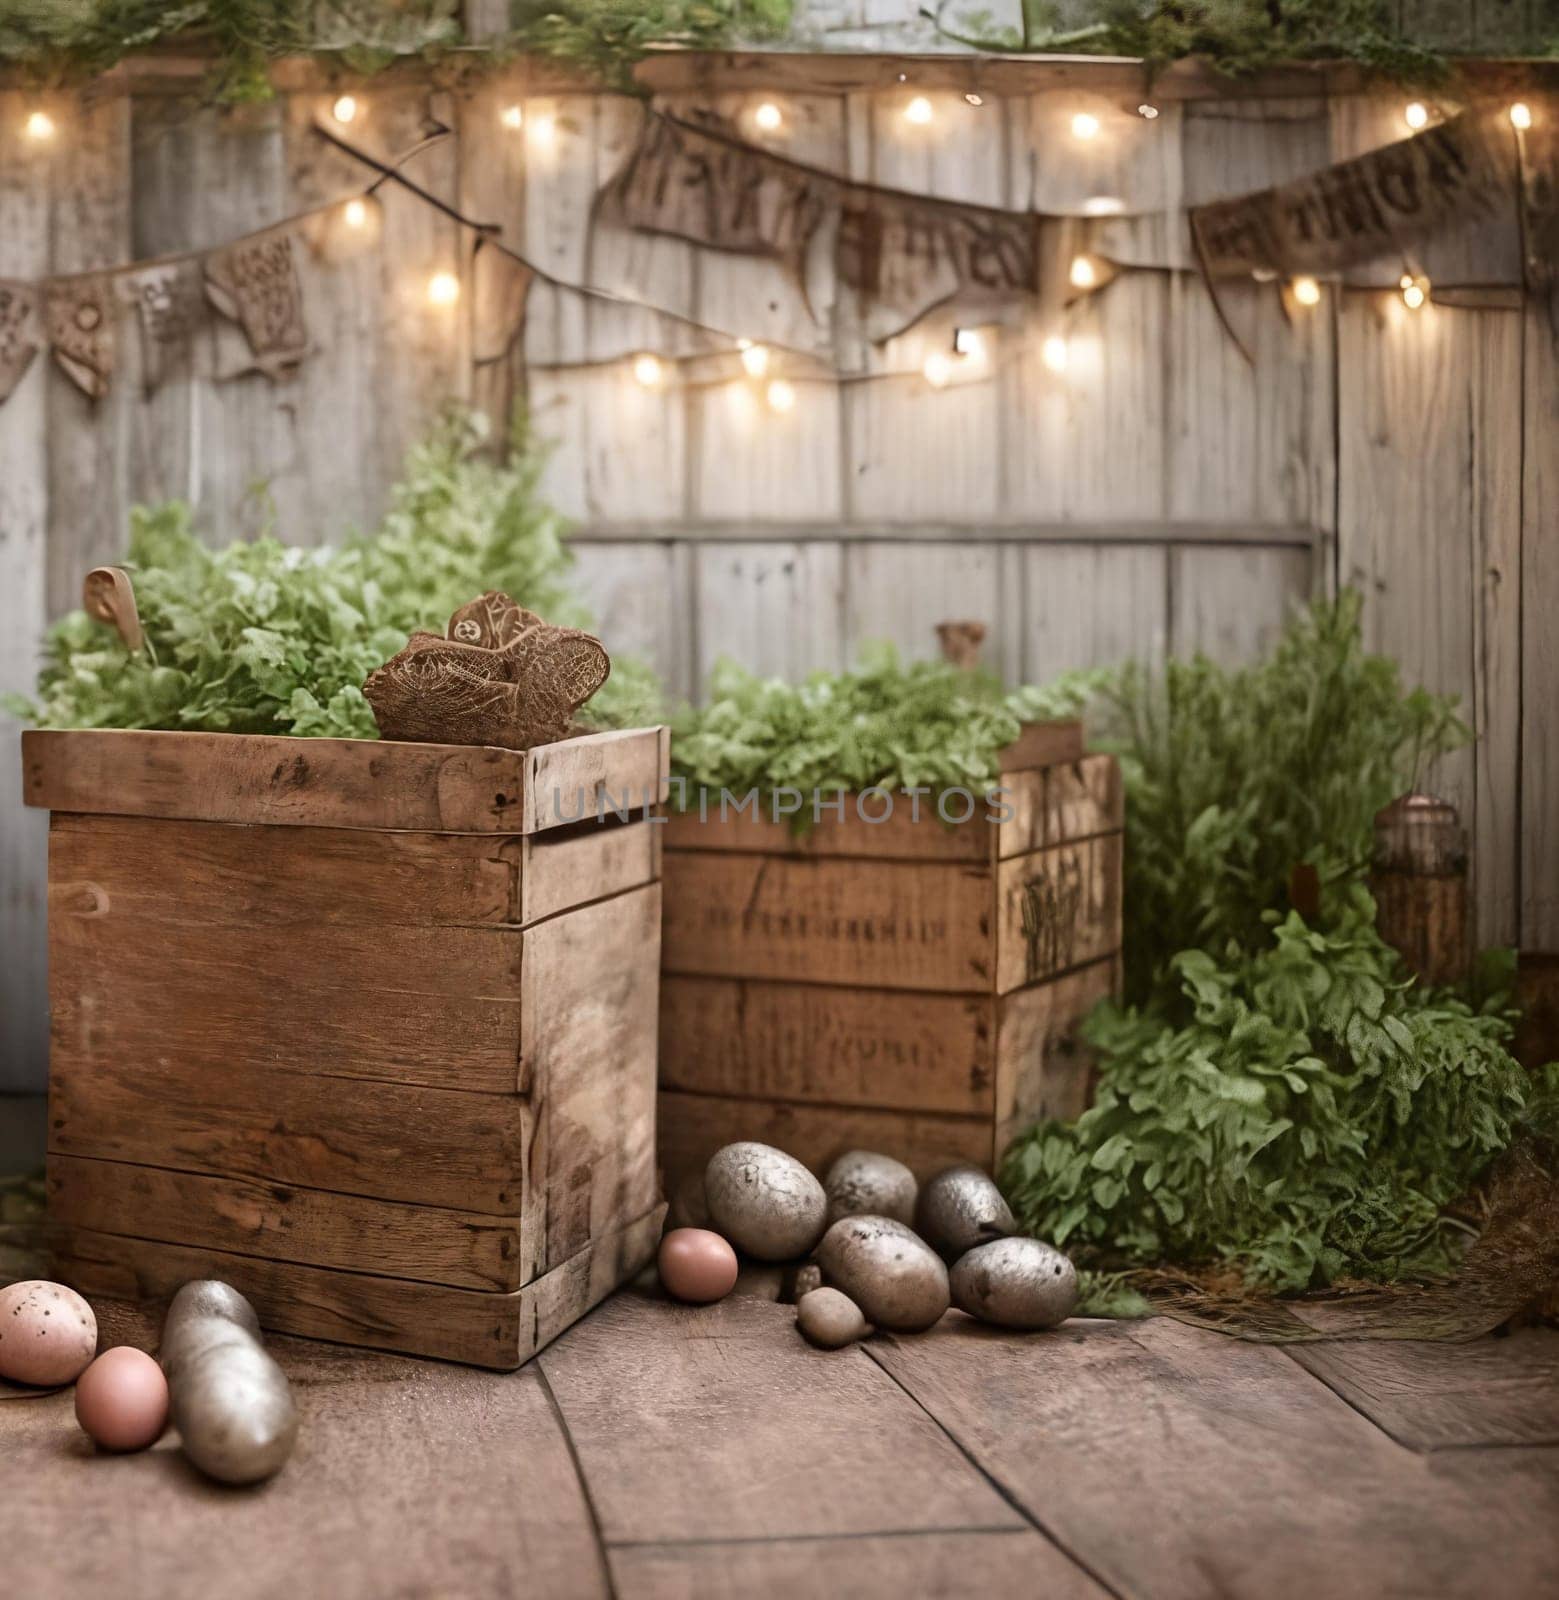 Rustic Easter Charm. A rustic vignette featuring weathered wooden crates, burlap accents, and vintage-inspired Easter decorations like metal bunny silhouettes or distressed signage, evoking a sense of nostalgia and country charm.